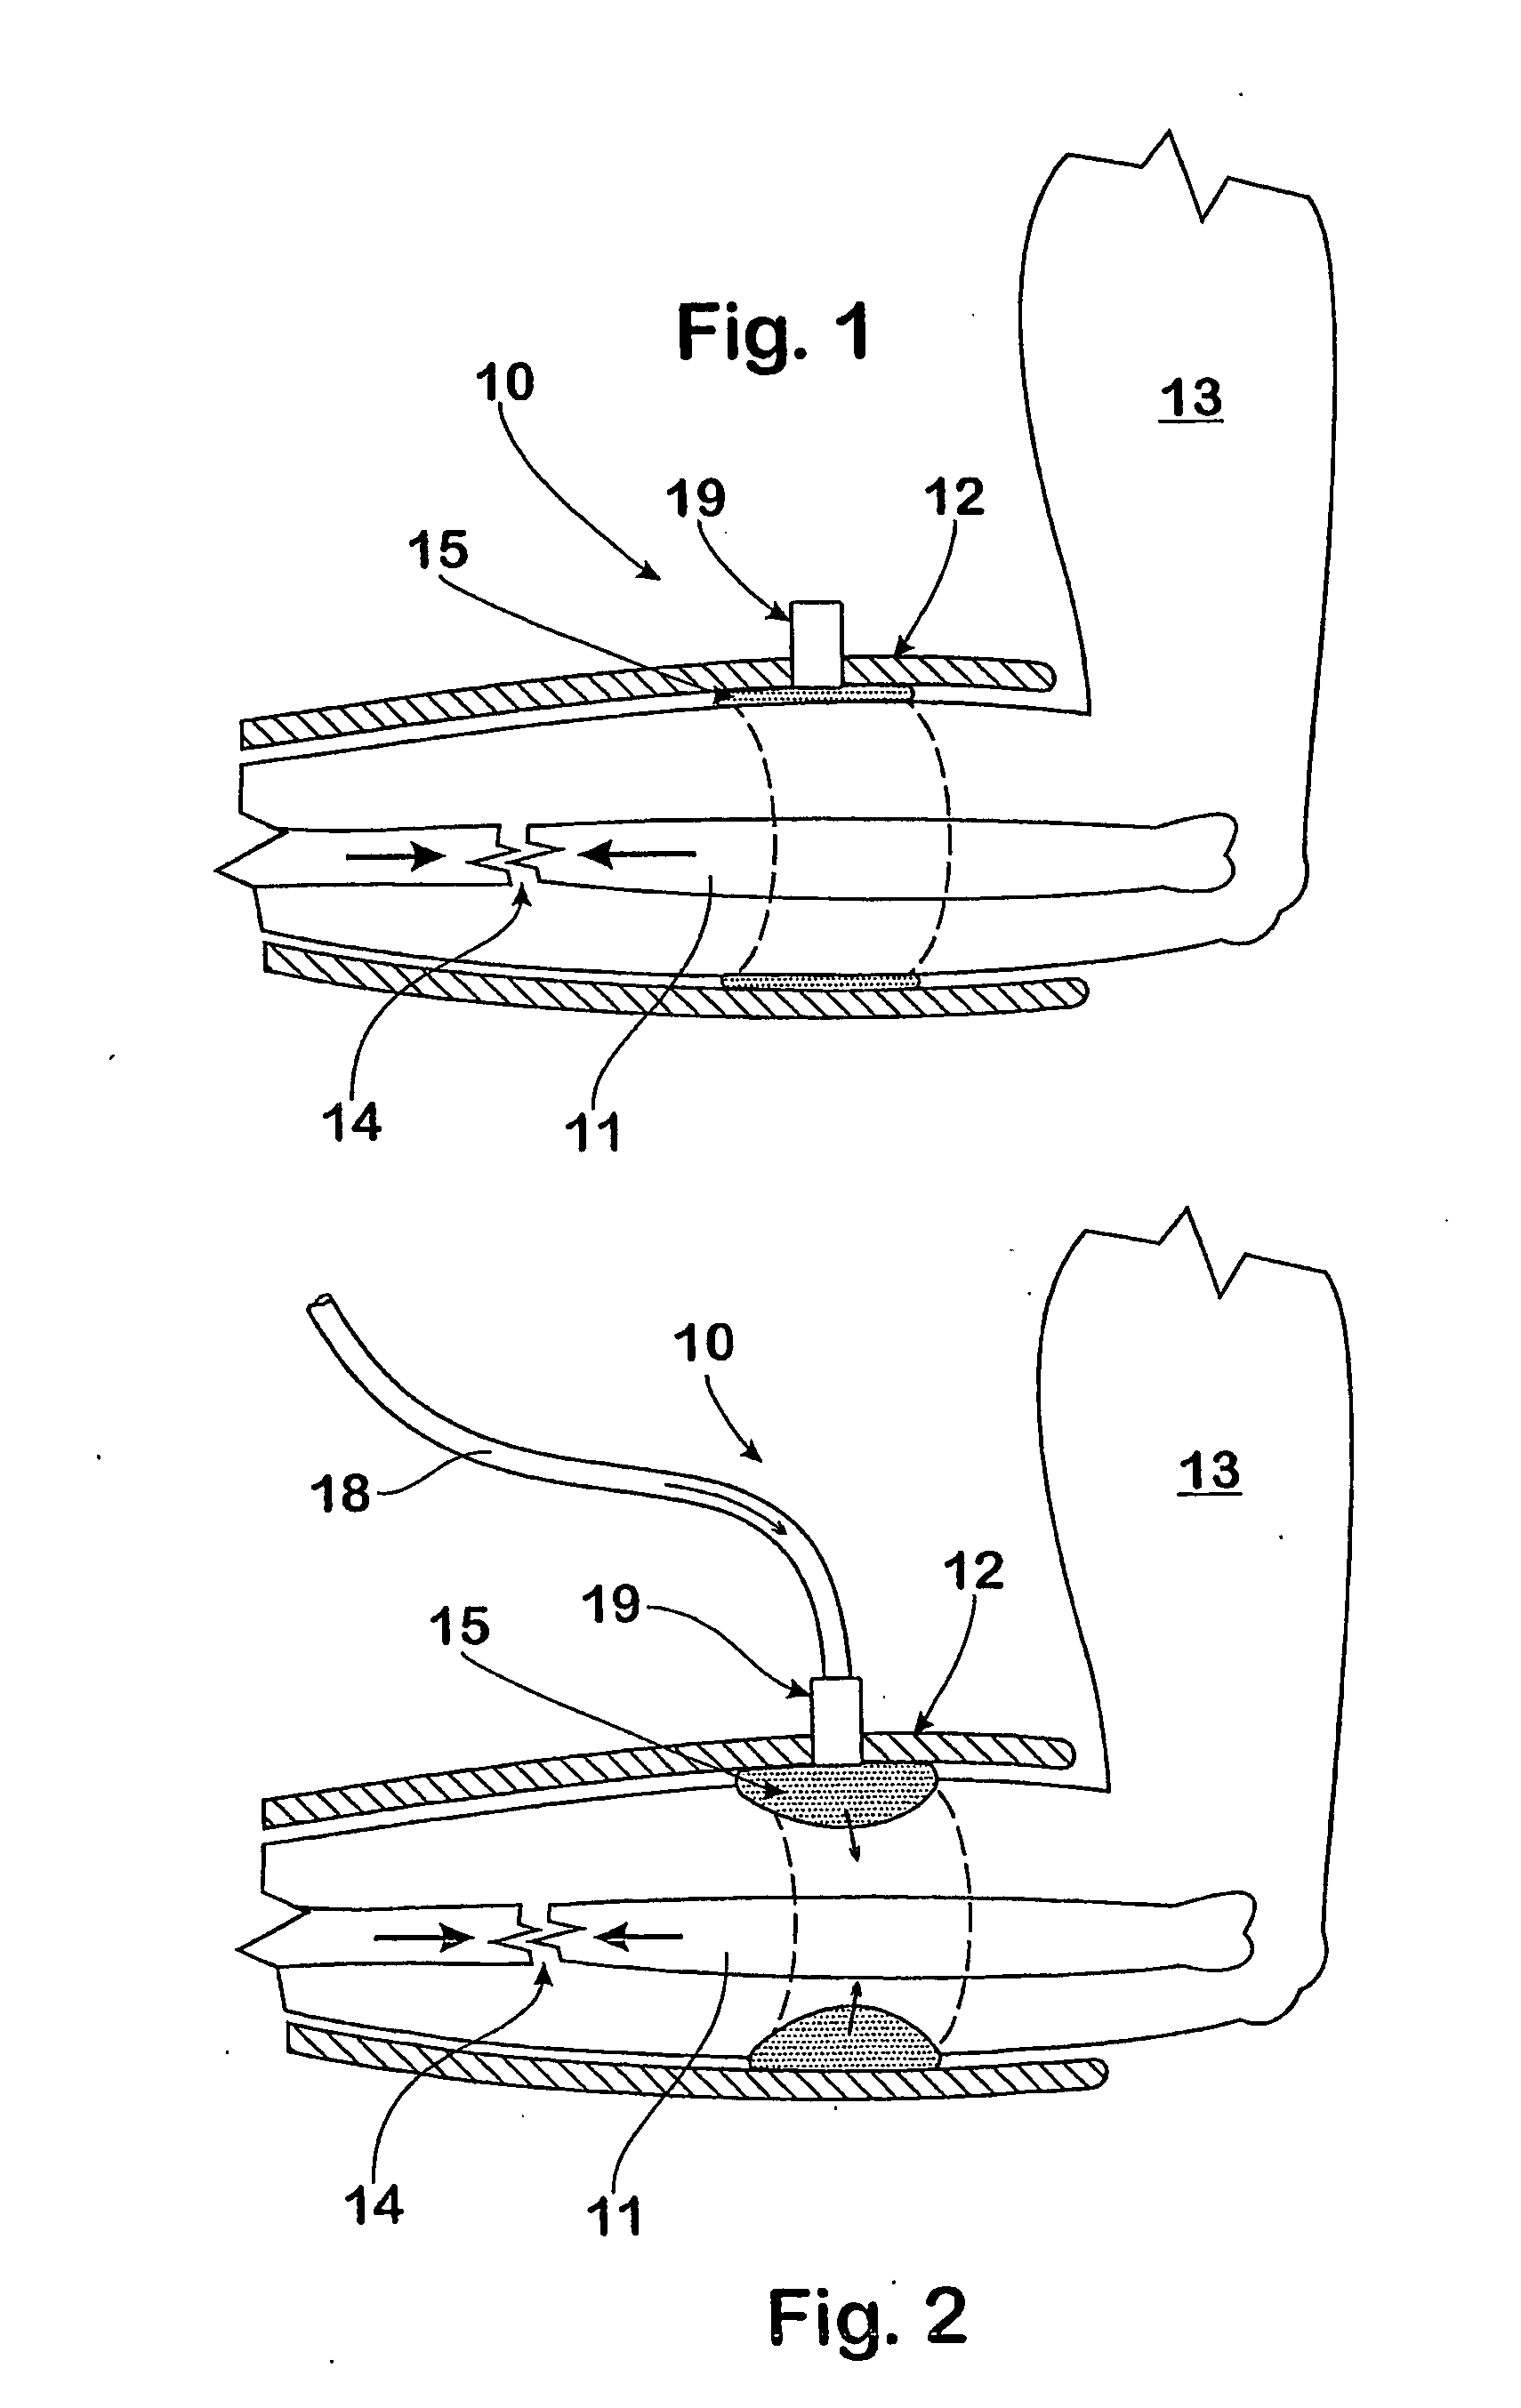 Apparatus and method for treatment of long bone fractures